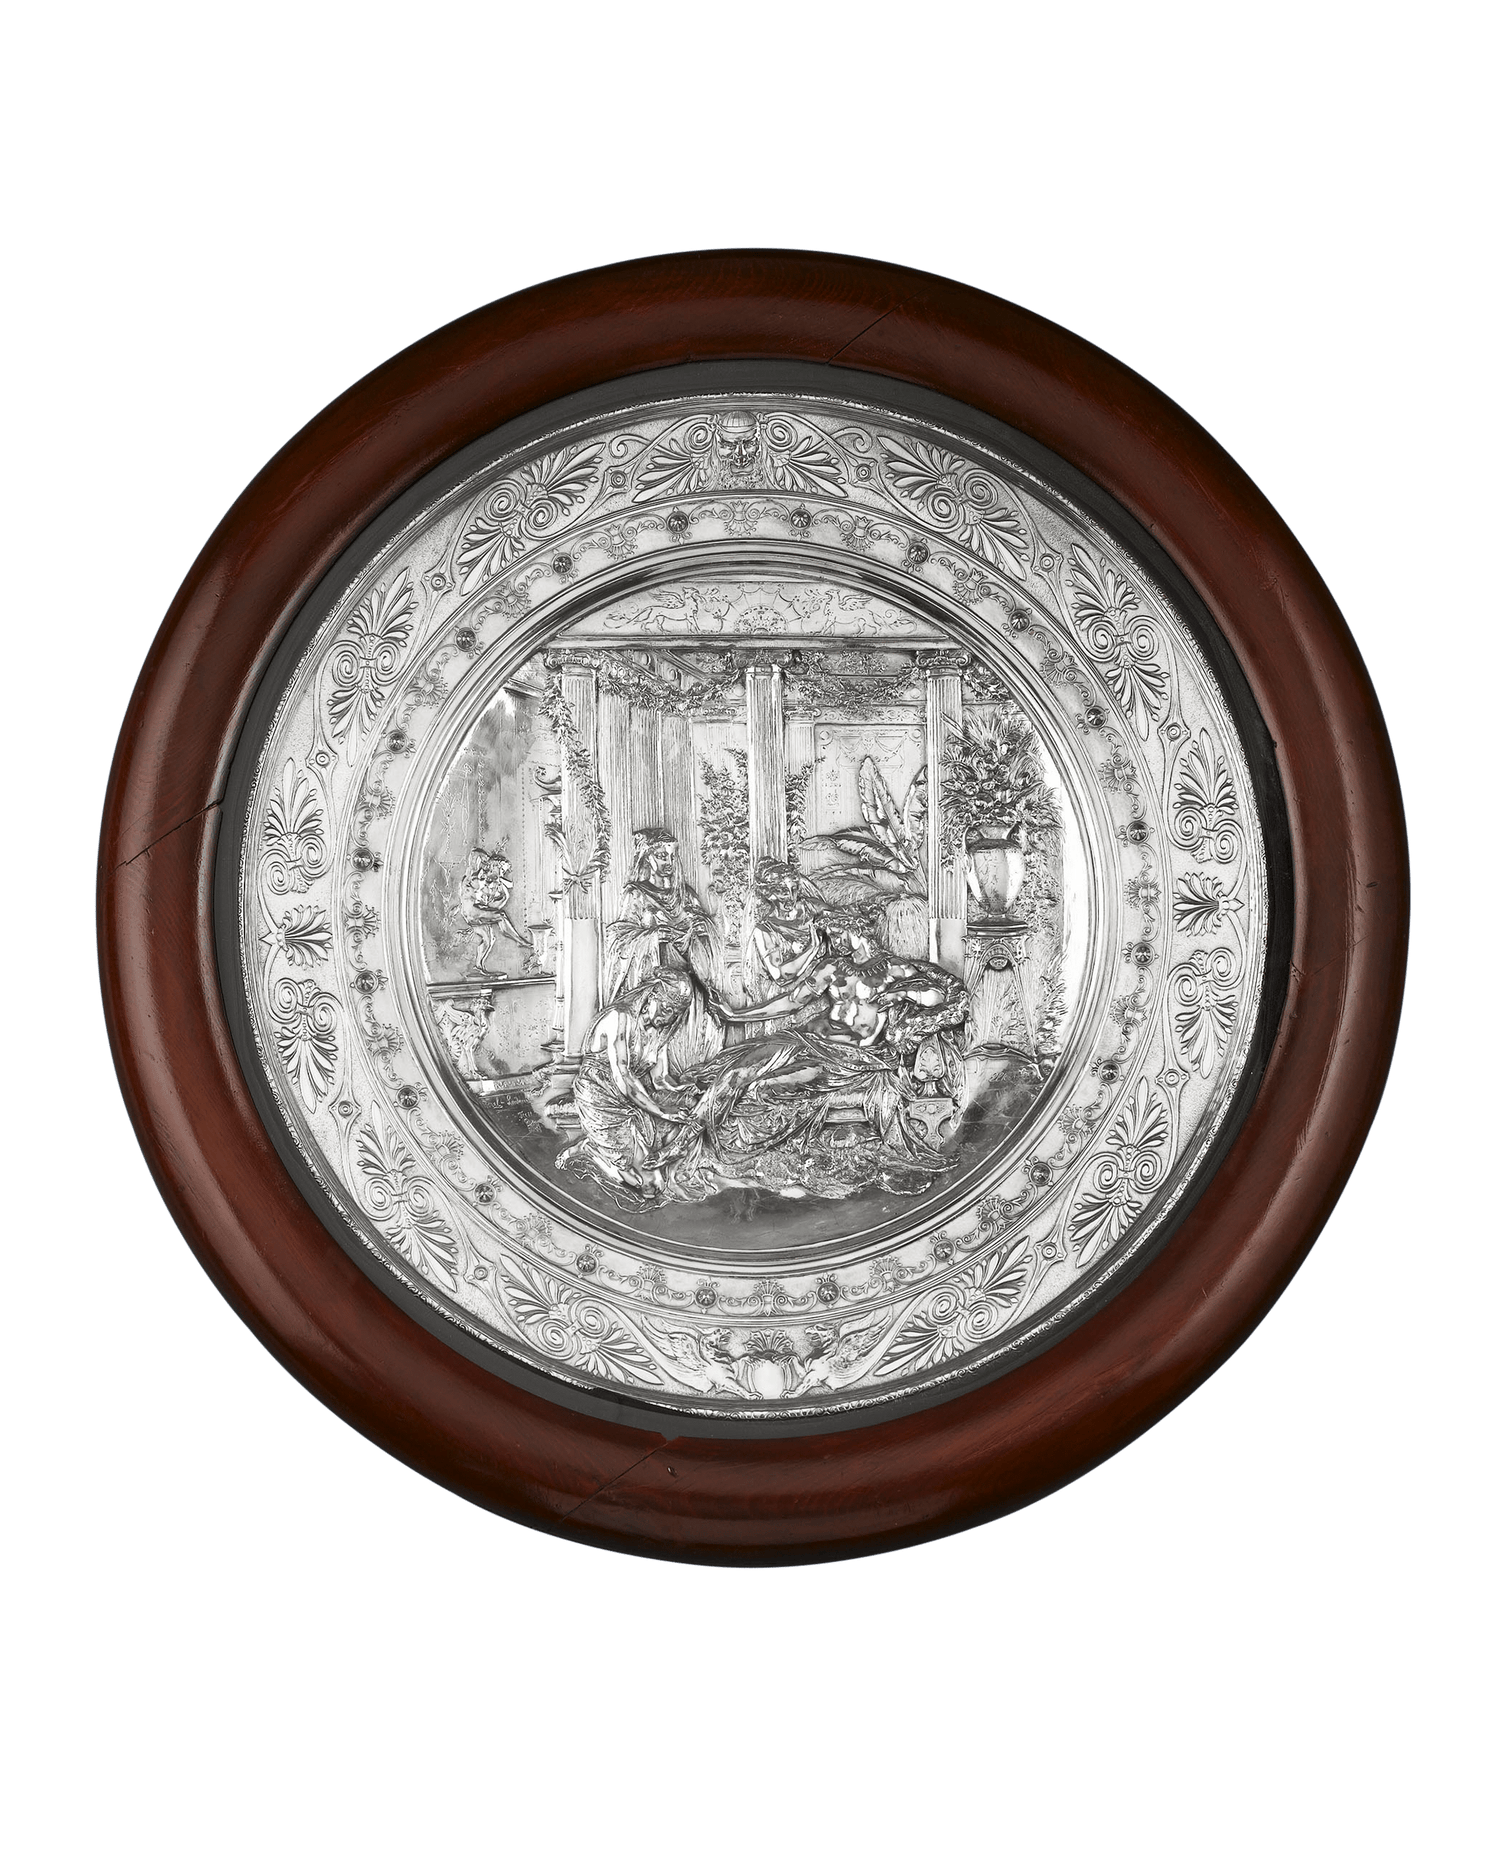 Elkington & Co. Silverplate Charger by Morel-Ladeuil